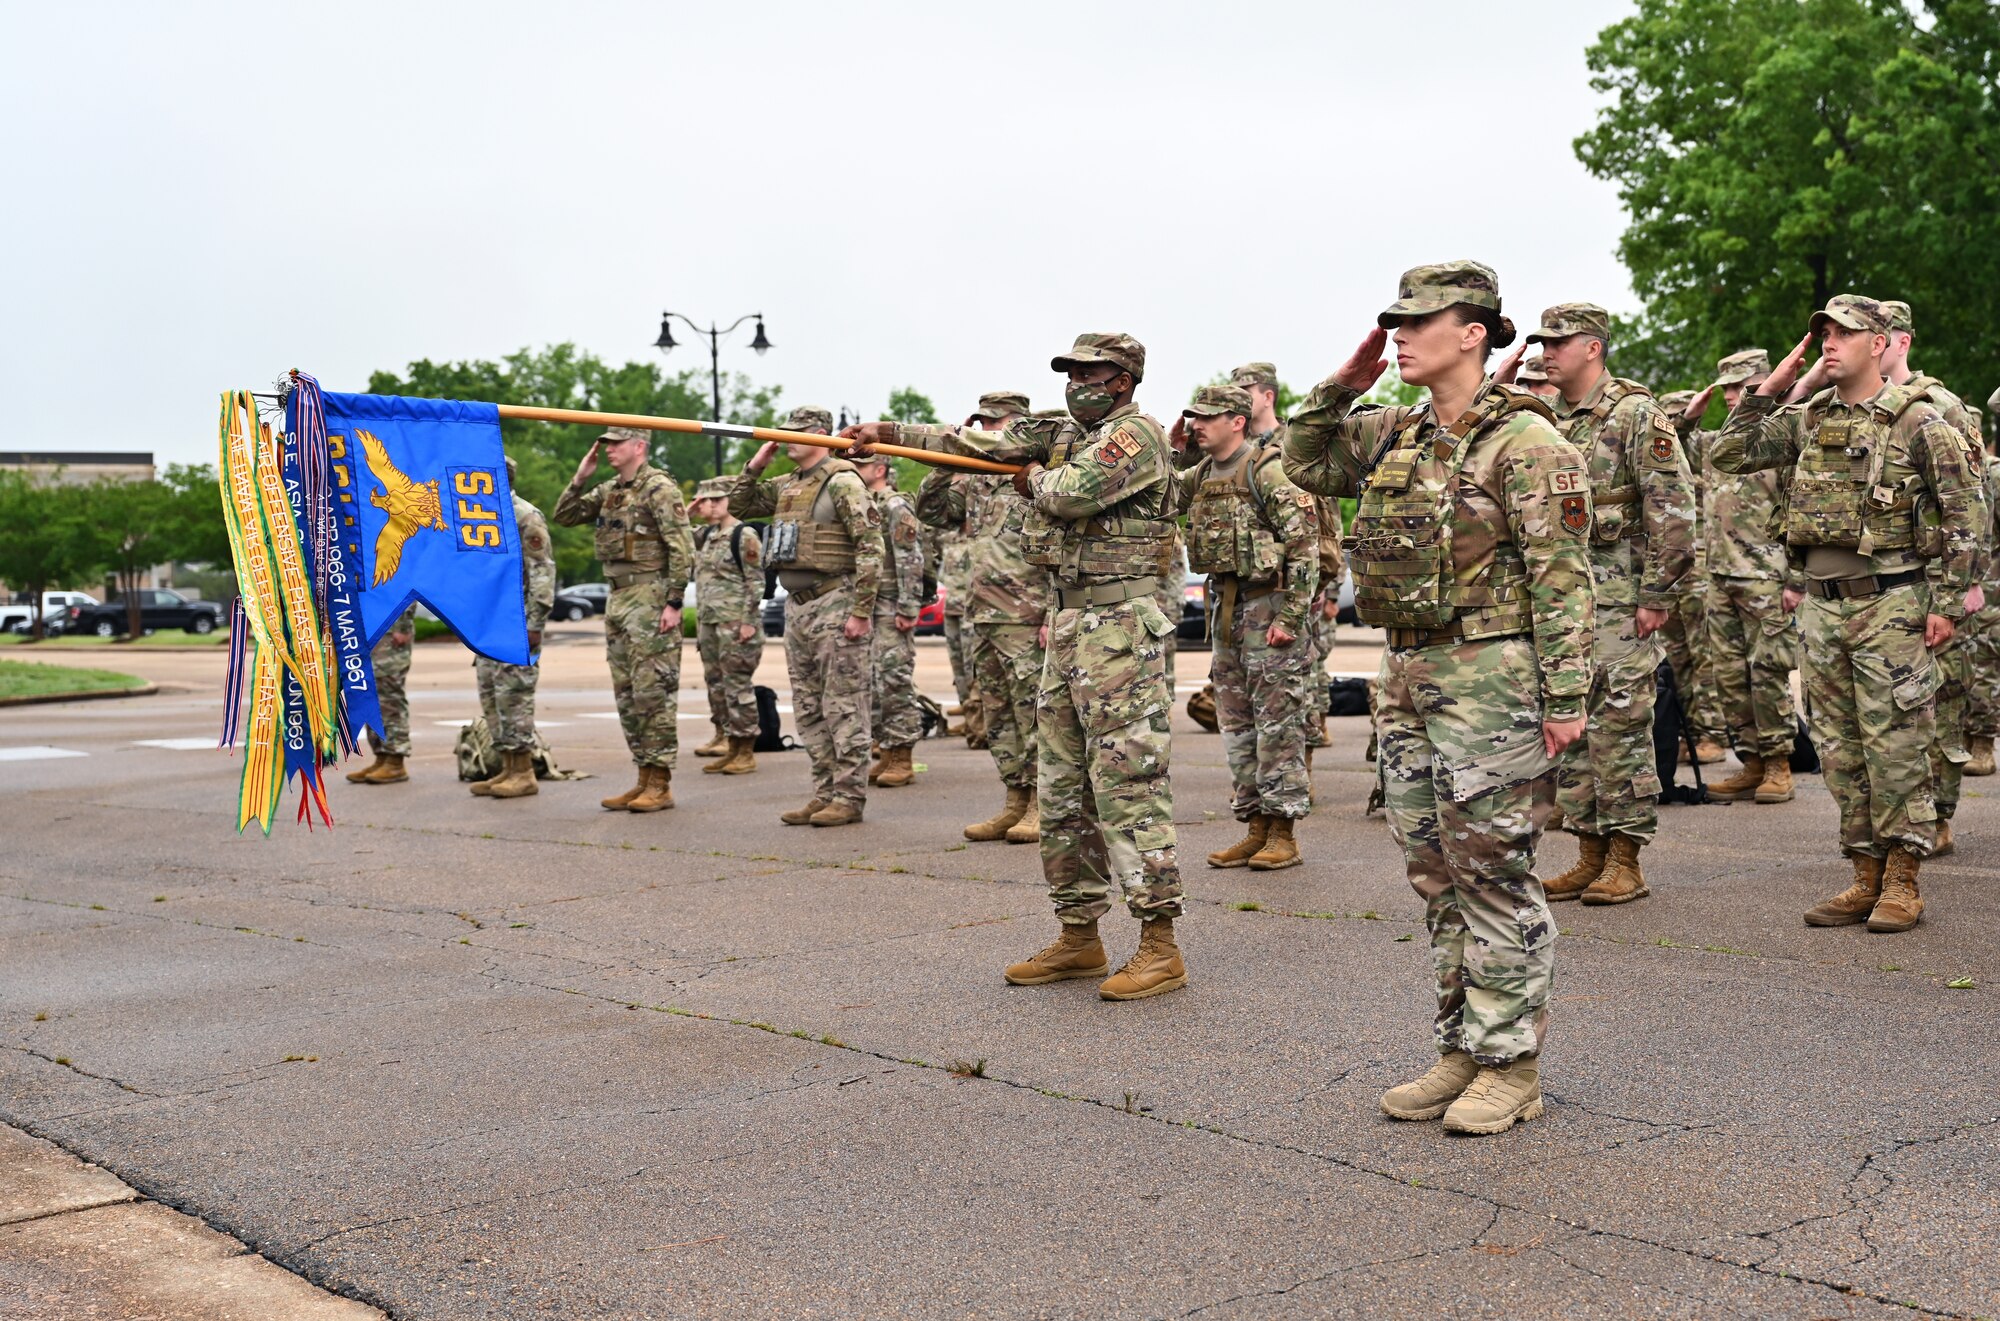 Squadrons from around the base salute the flag as reveille begins May 10, 2021, on Columbus Air Force Base, Mississippi. Reveille is a ceremony to signal the start of the duty day and shows respect to the flag along with Retreat used to signal the end of the duty day. (U.S. Air Force photo by Senior Airman Jake Jacobsen)